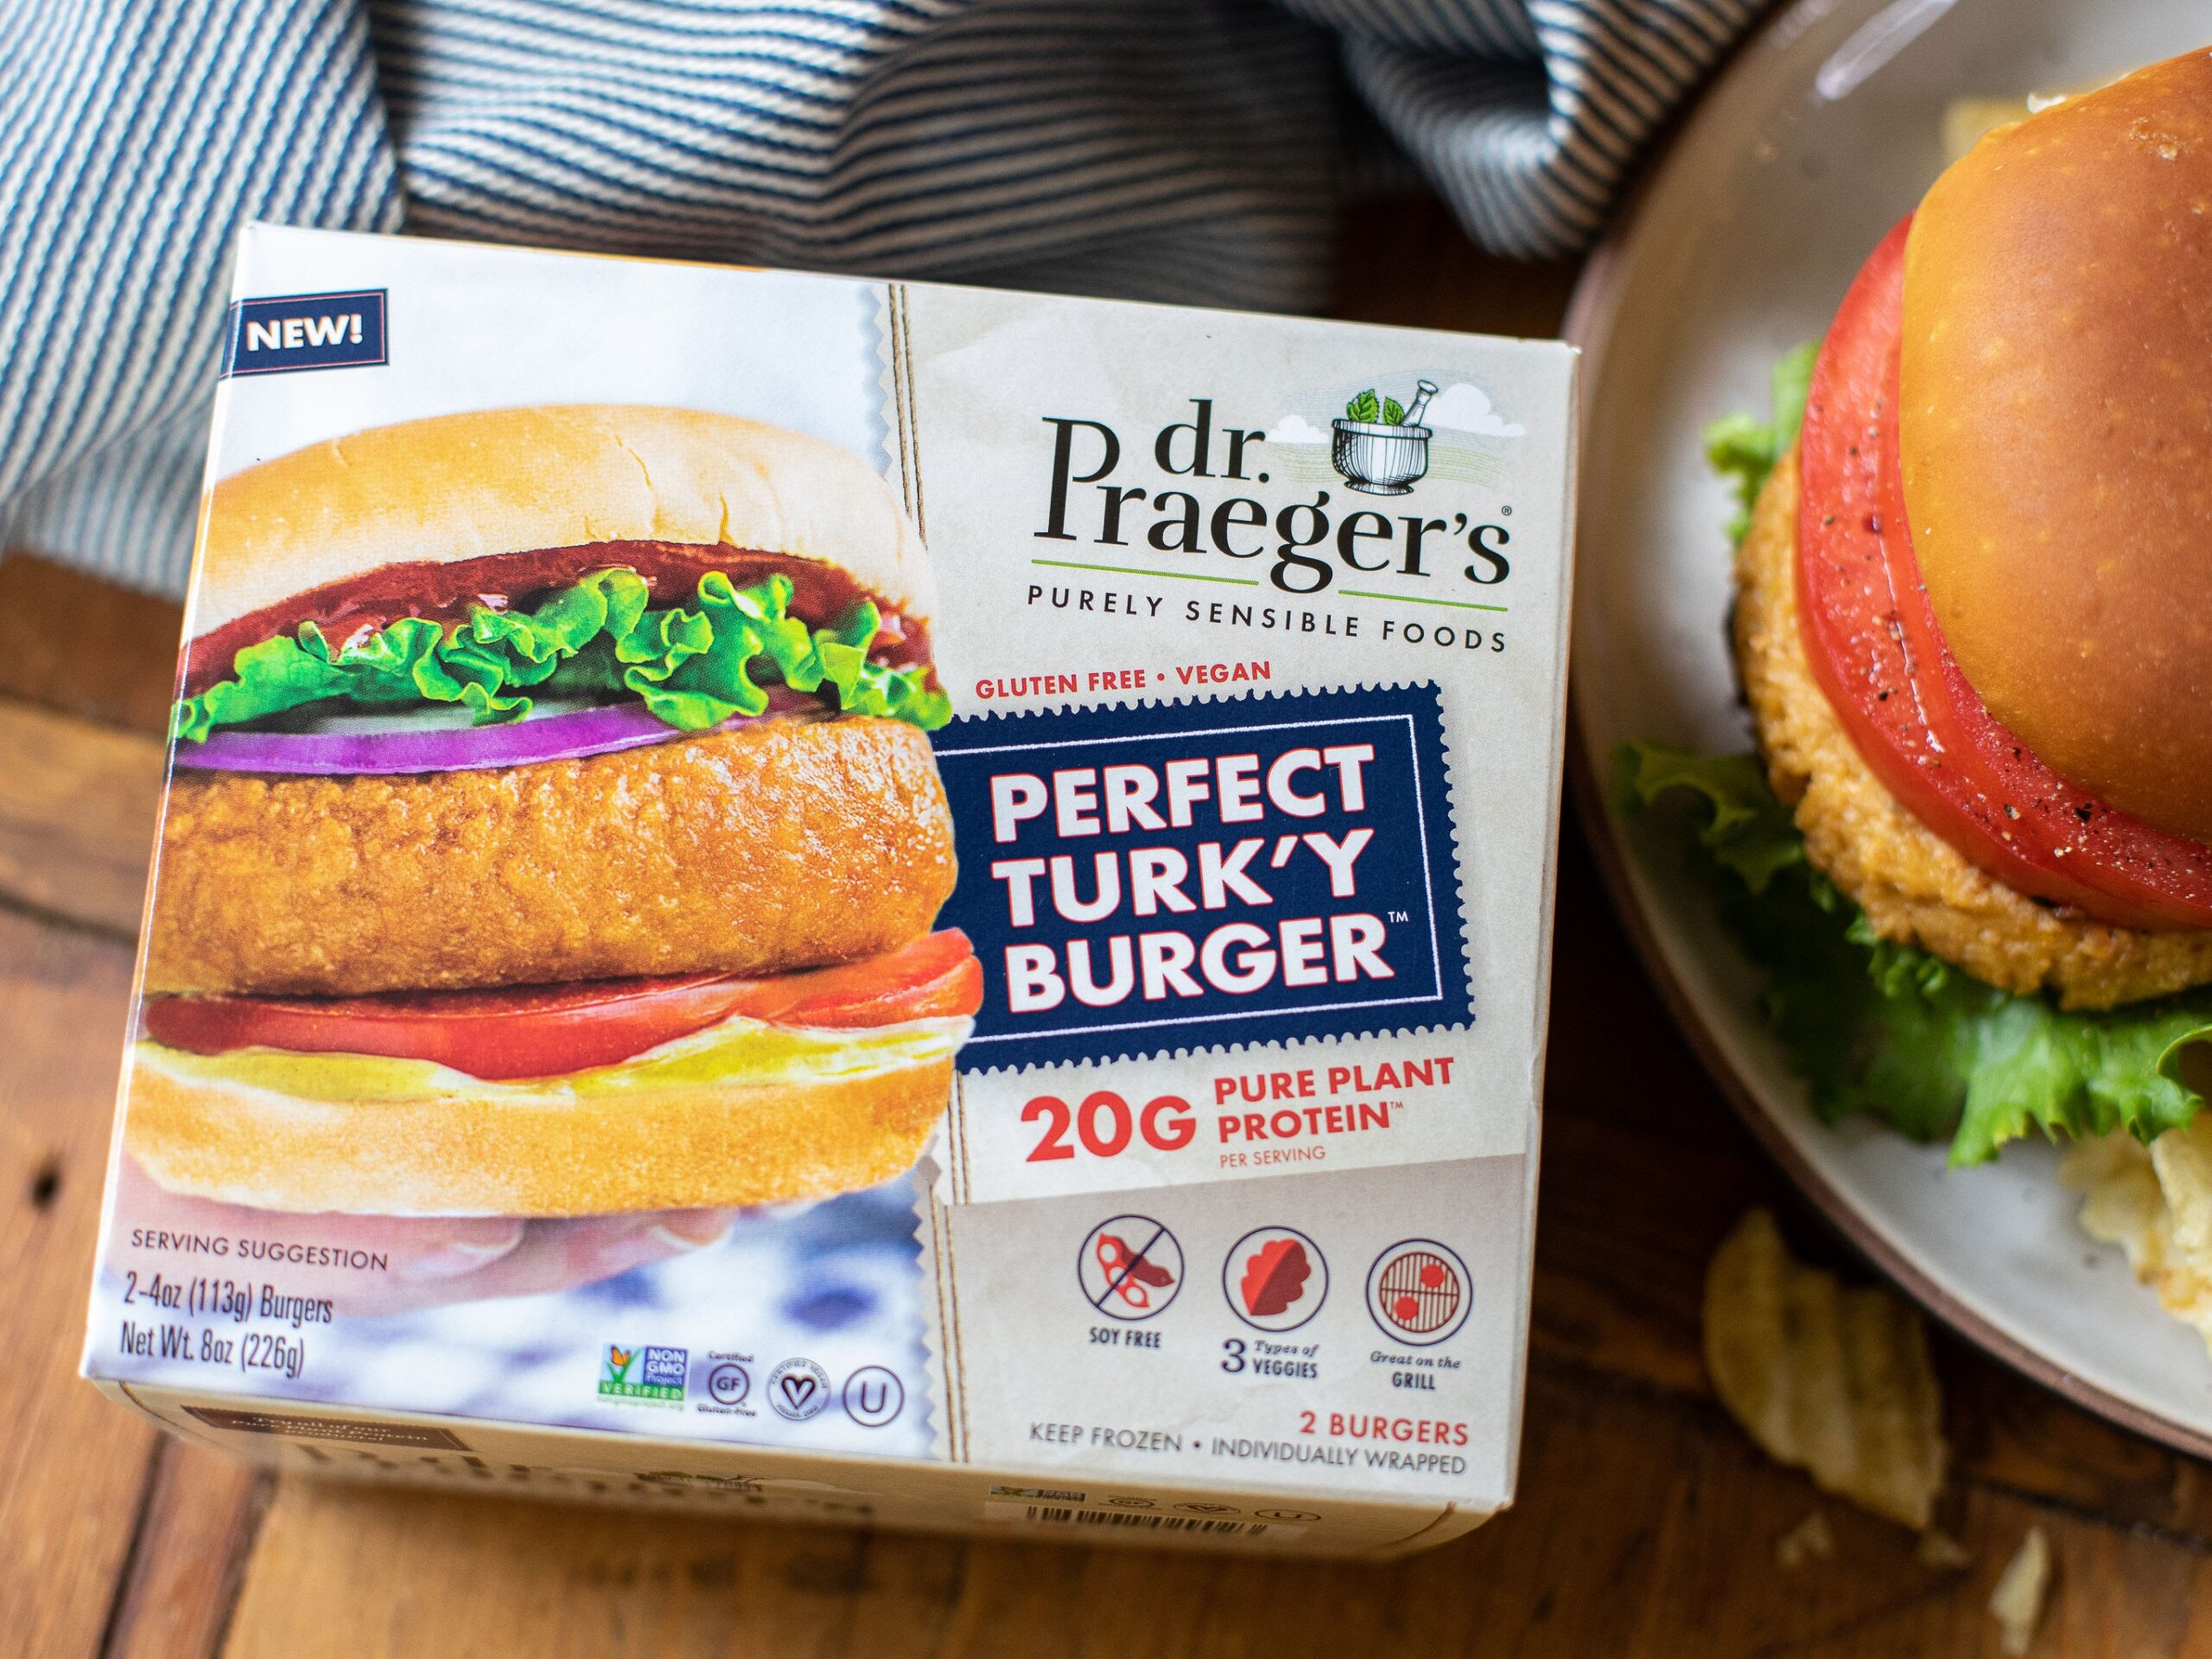 Get Dr Praeger’s Purely Sensible Products As Low As 40¢ At Publix